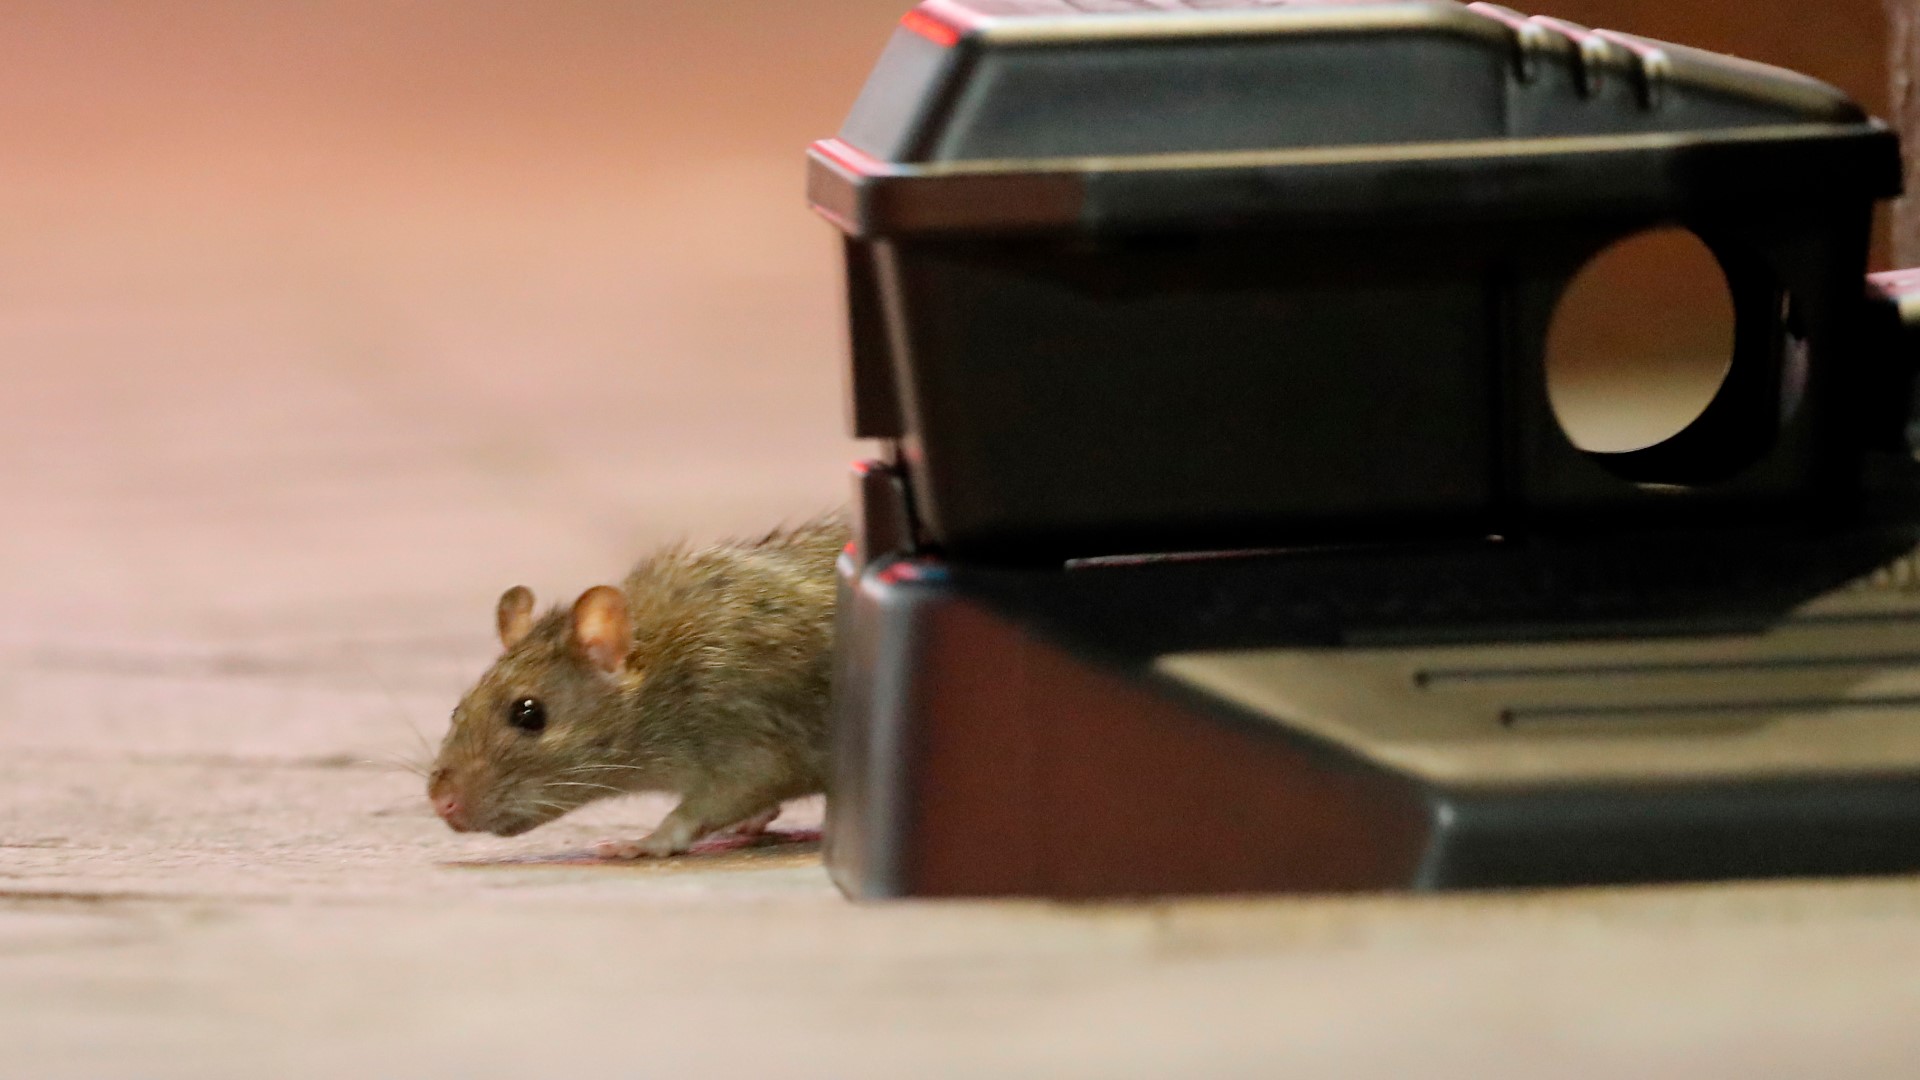 City director of Mosquito, Termite and Rodent Control Claudia Riegel said the rats are scurrying because restaurants don't have dine-in service anymore.